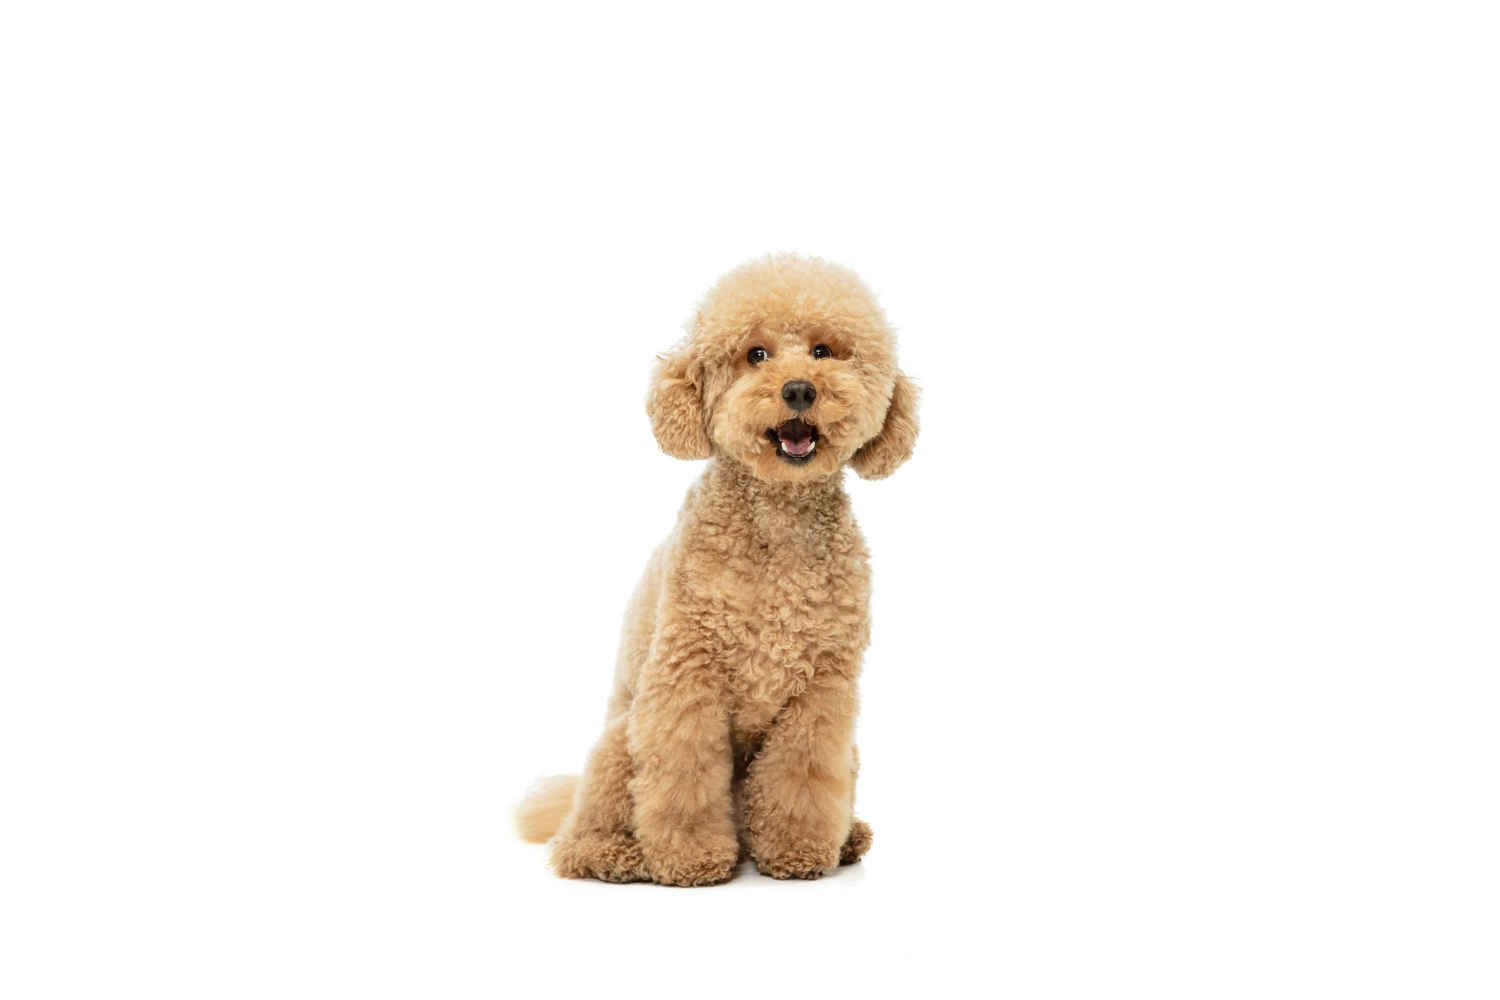 What are some fun and engaging activities you can do with your Poodle puppy during the first two weeks?